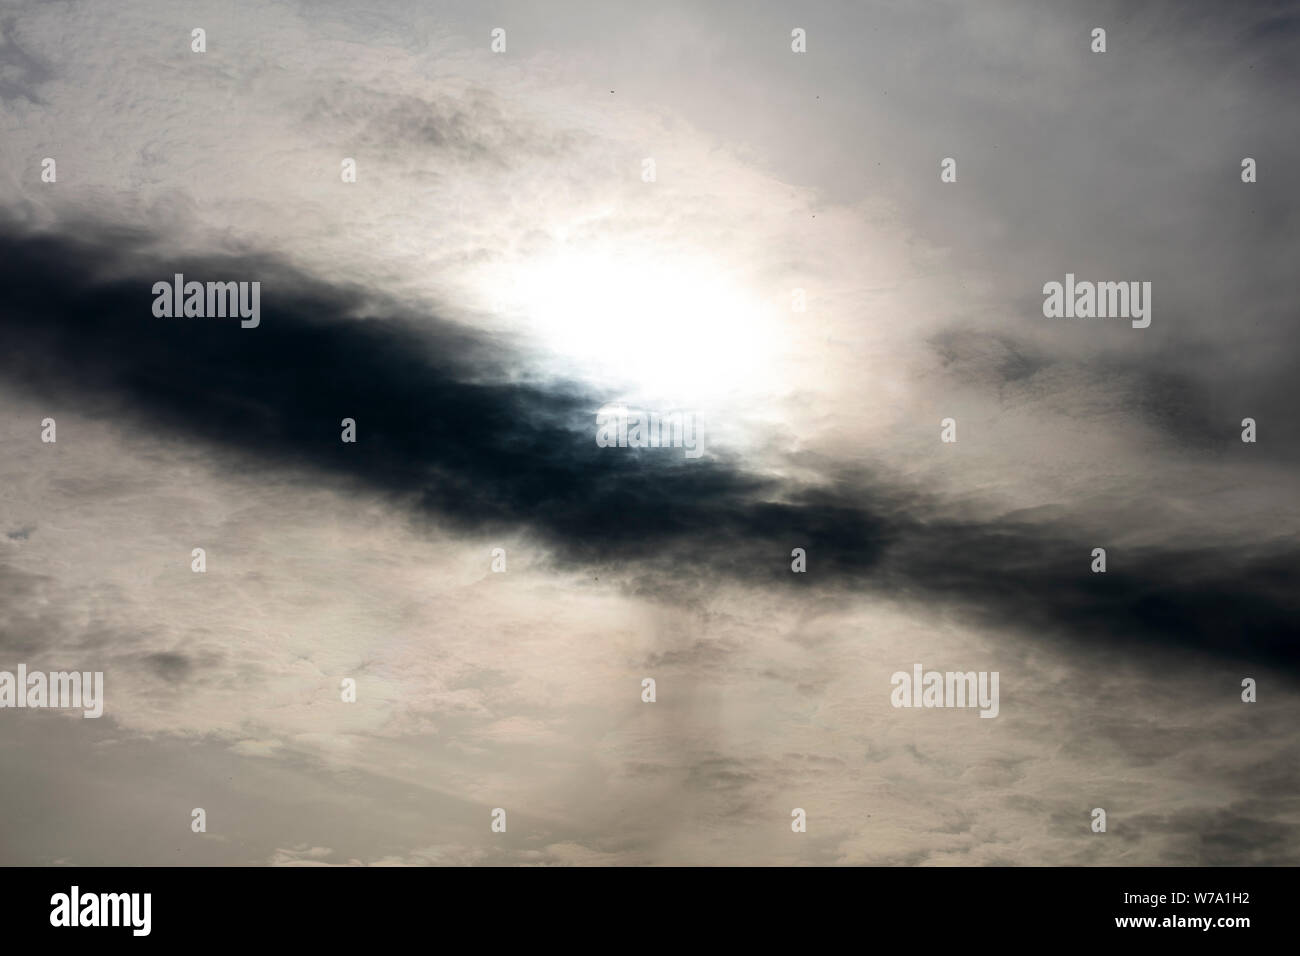 Gray sky with clouds sad mood summer macro background fine art high quality prints products fifty megapixels Stock Photo